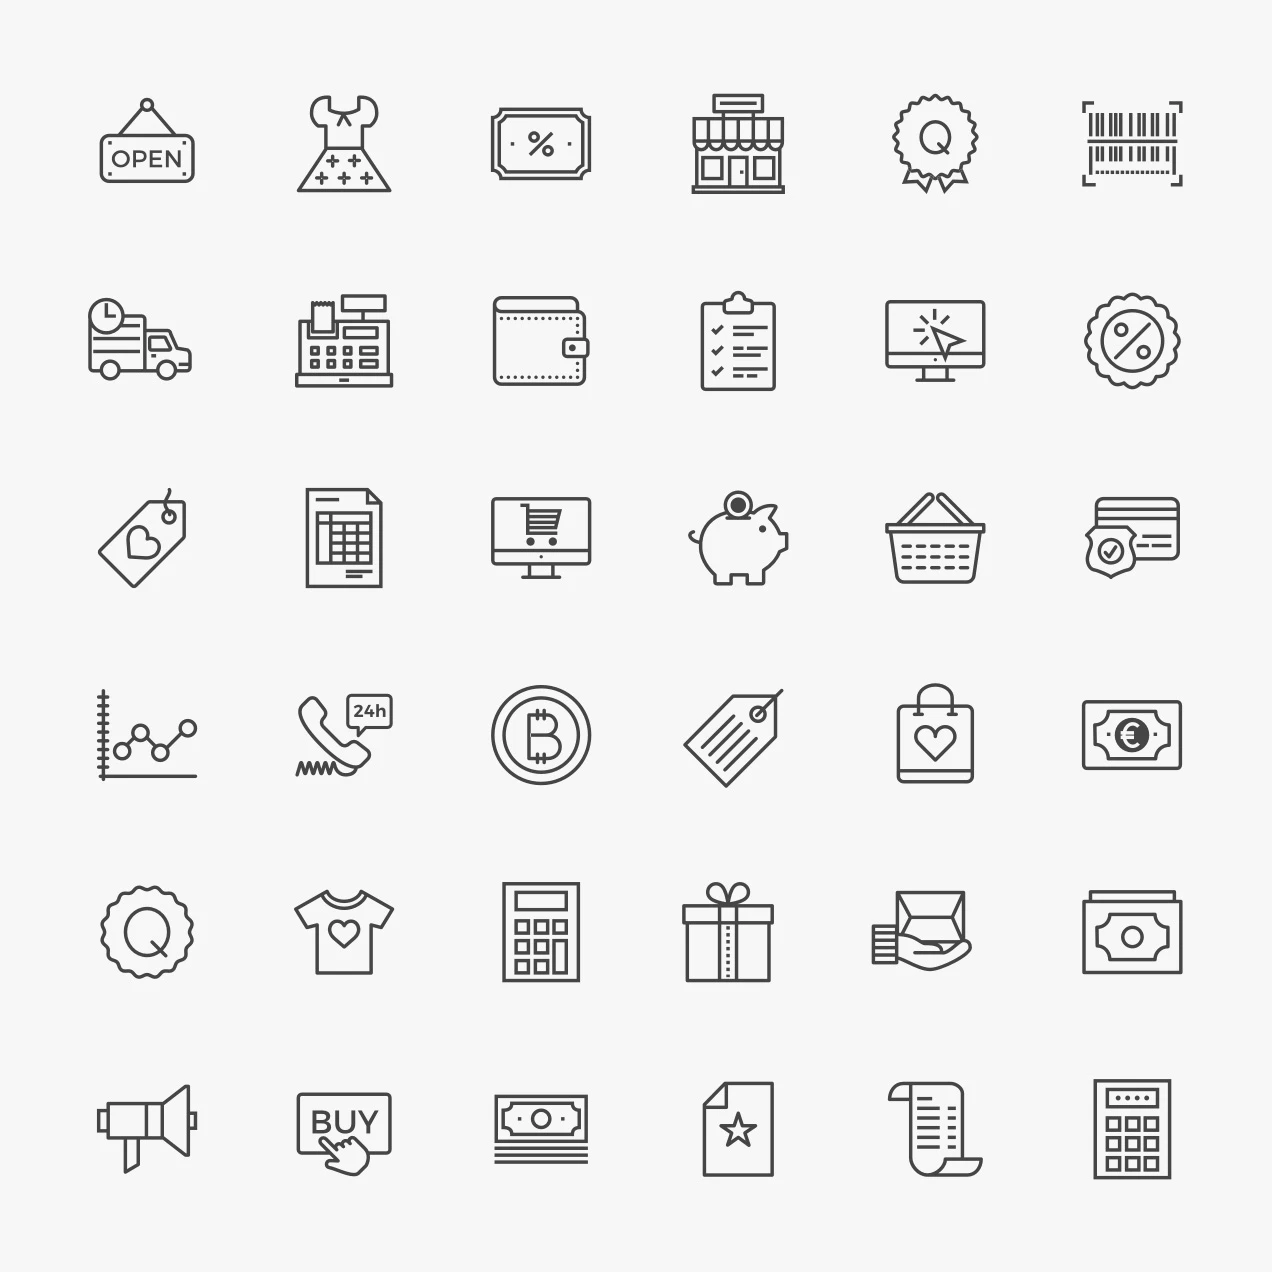 Ecommerce Free Icon Pack - 38 free, flat-line ecommerce icons for your next product design project.